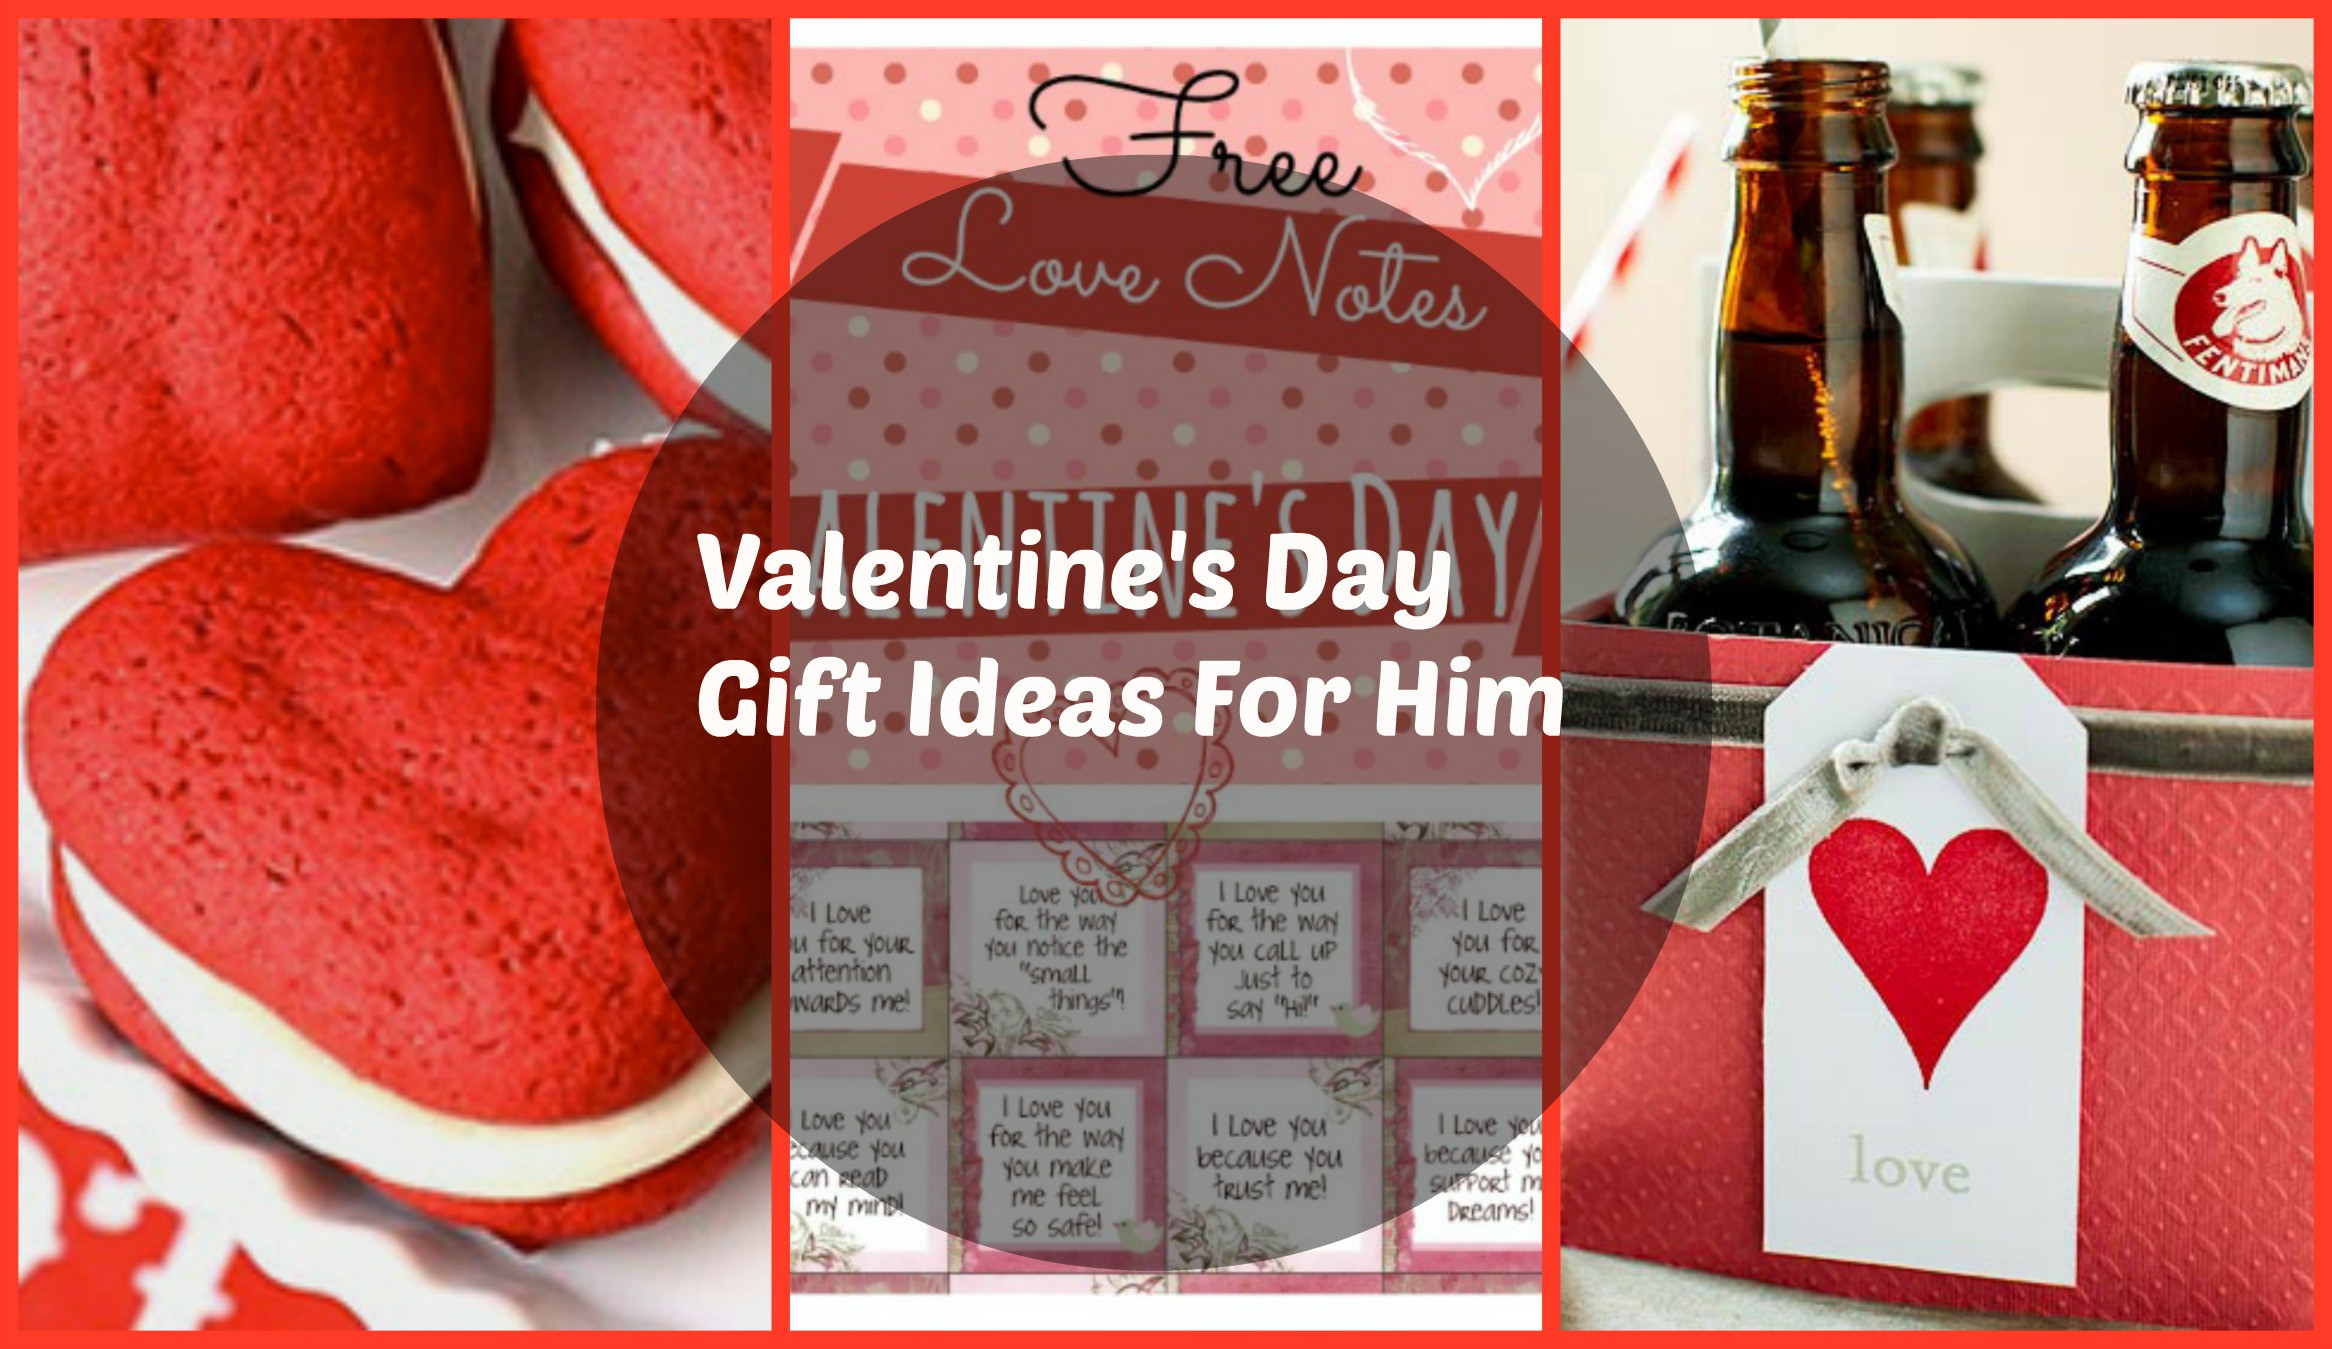 Valentine'S Day Gift Ideas For Him Homemade
 Valentine s Gift Ideas for Him Archives Fashion Trend Seeker